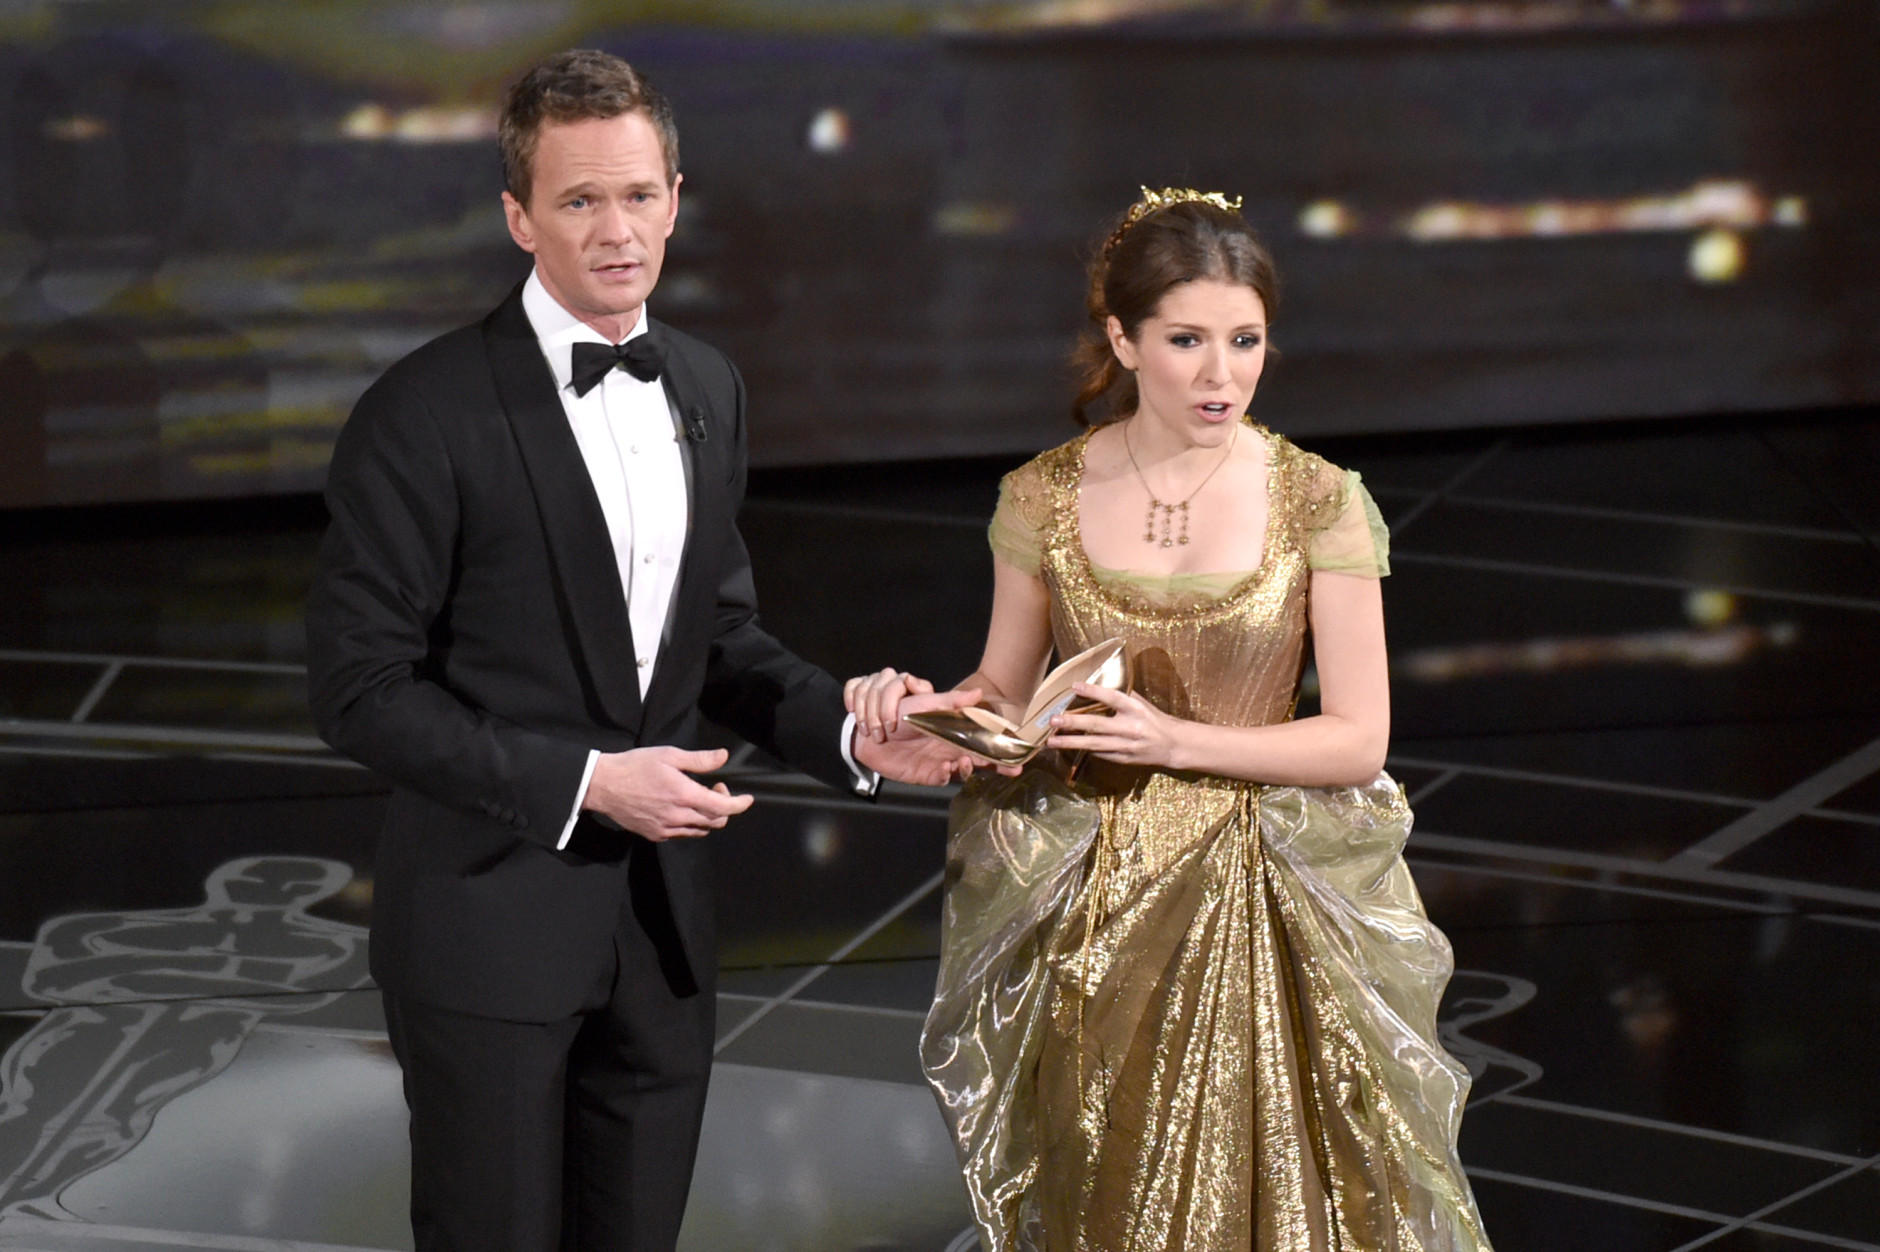 Host Neil Patrick Harris, left, and Anna Kendrick perform at the Oscars on Sunday, Feb. 22, 2015, at the Dolby Theatre in Los Angeles. (Photo by John Shearer/Invision/AP)